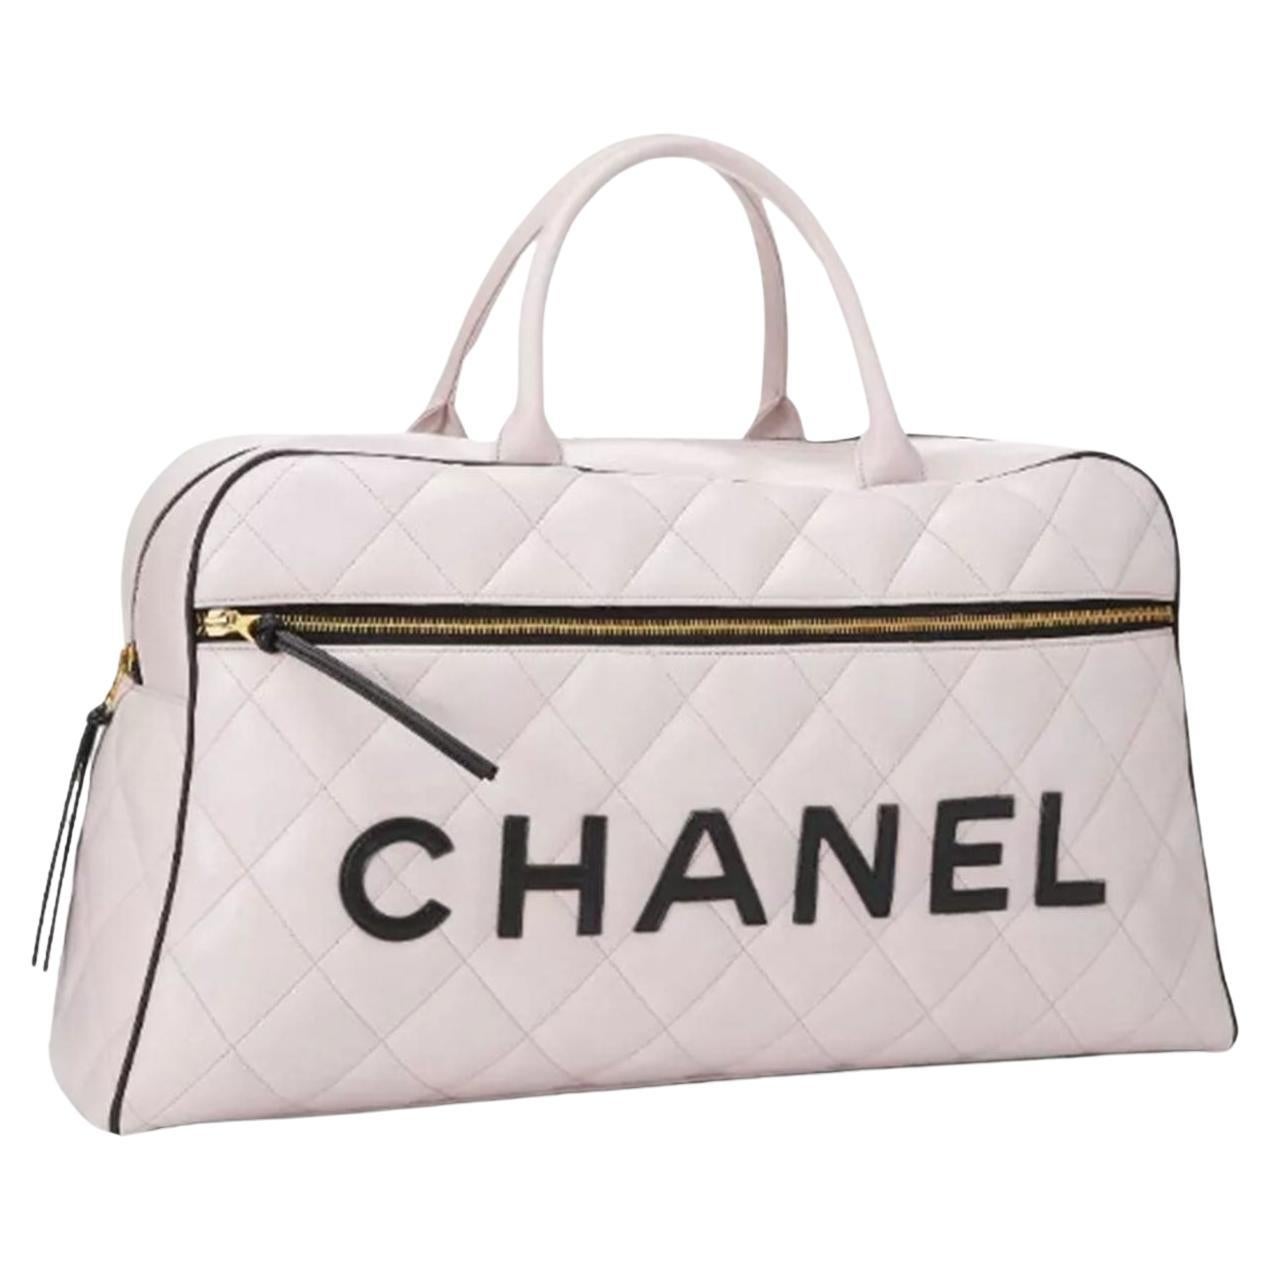 Chanel Limited Edition Vintage Duffel Tote White and Black Leather Weekend Bag